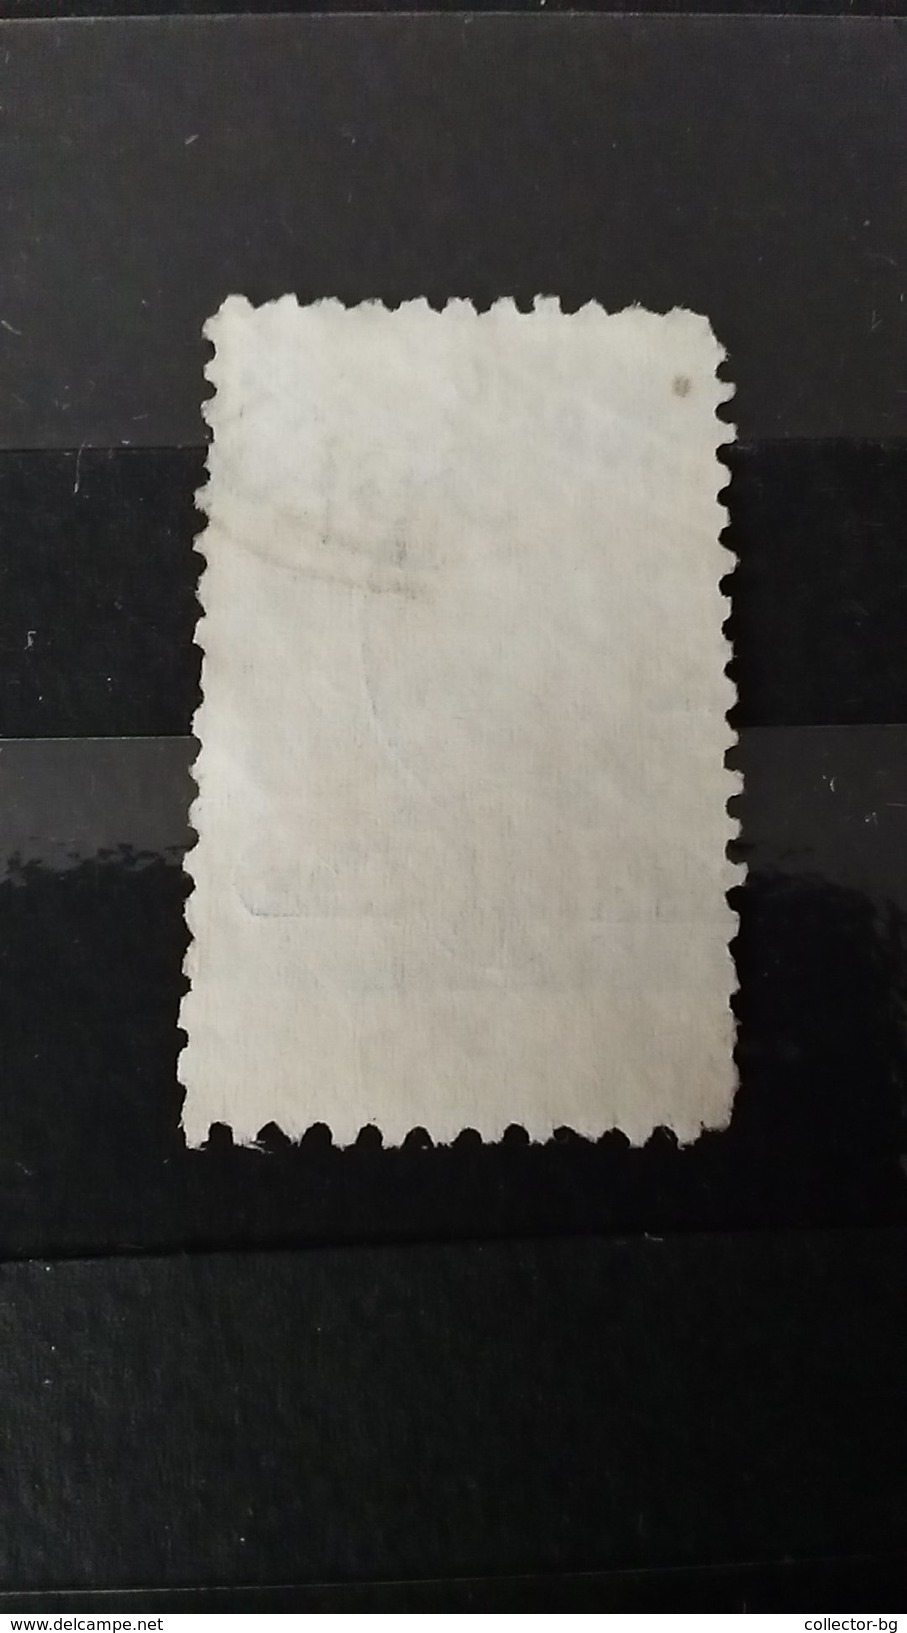 ULTRA RARE ERROR PERFORATED BOTTOM 50 REIS CORREIO BRAZIL TAXE STAMP TIMBRE 1898 USED  MINT - Unused Stamps